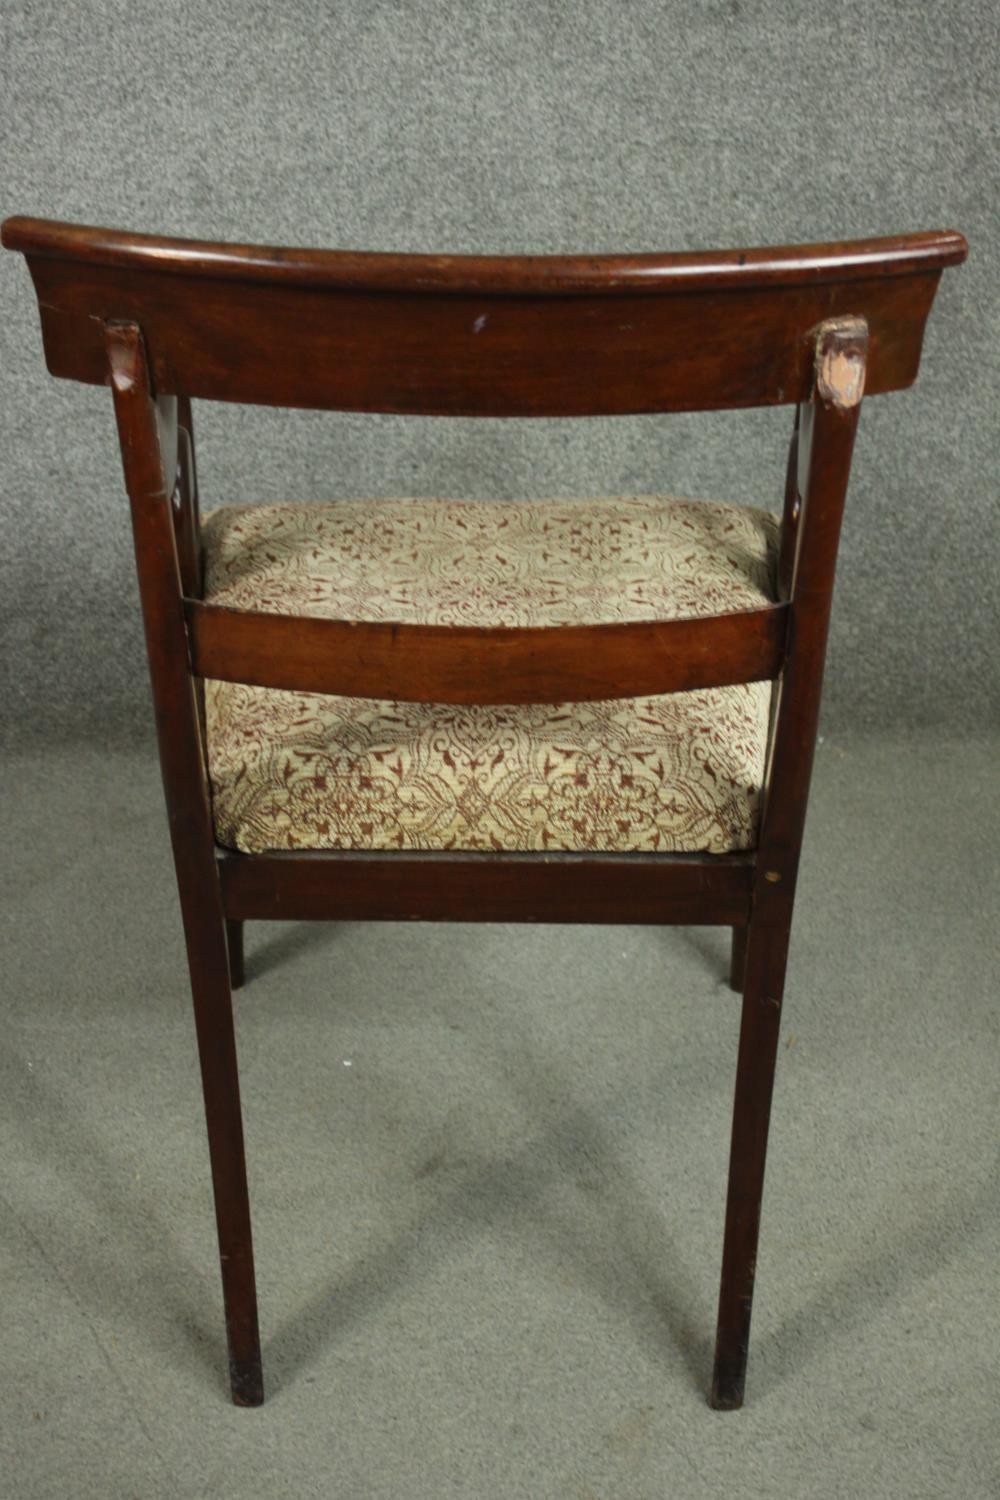 A Regency mahogany bar back open armchair, with scrolling arms, over a drop in seat, on turned legs. - Image 6 of 7